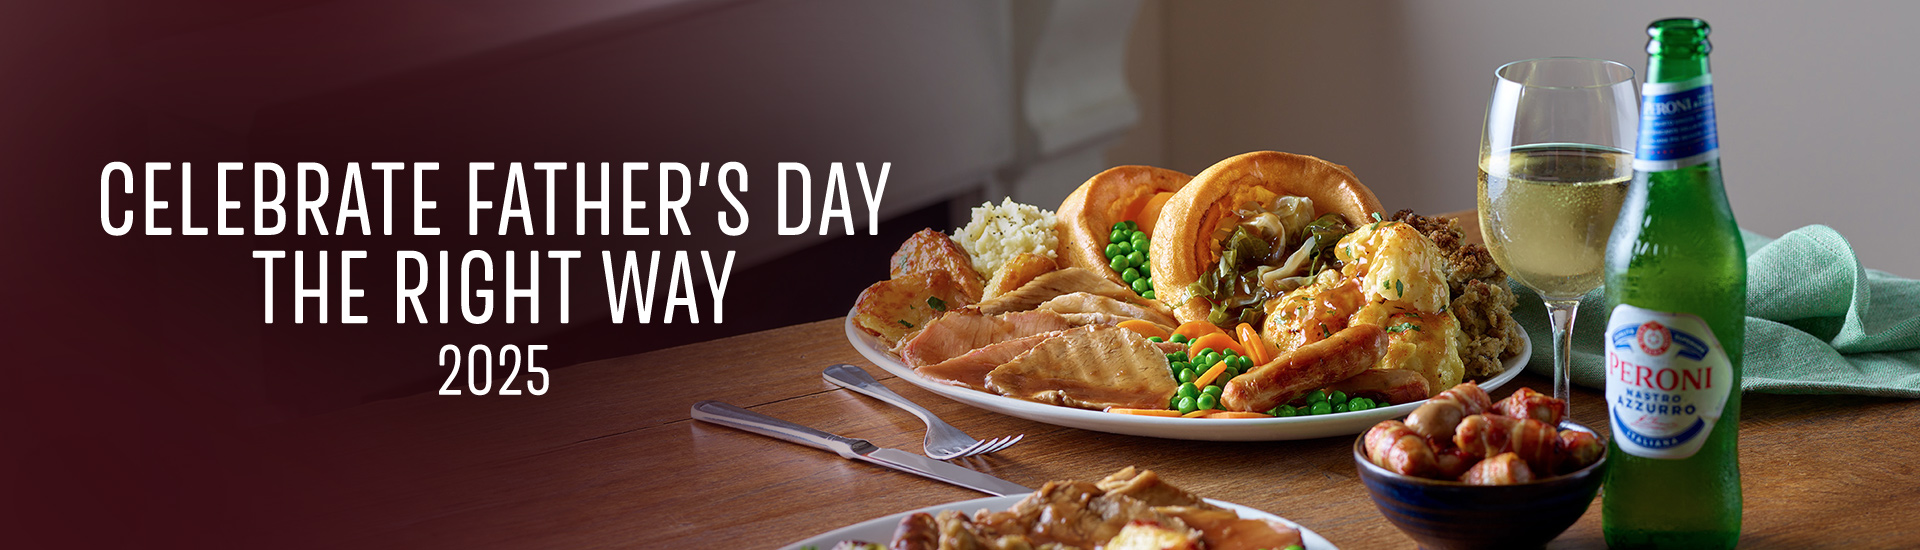 Father’s day carvery in Bradford